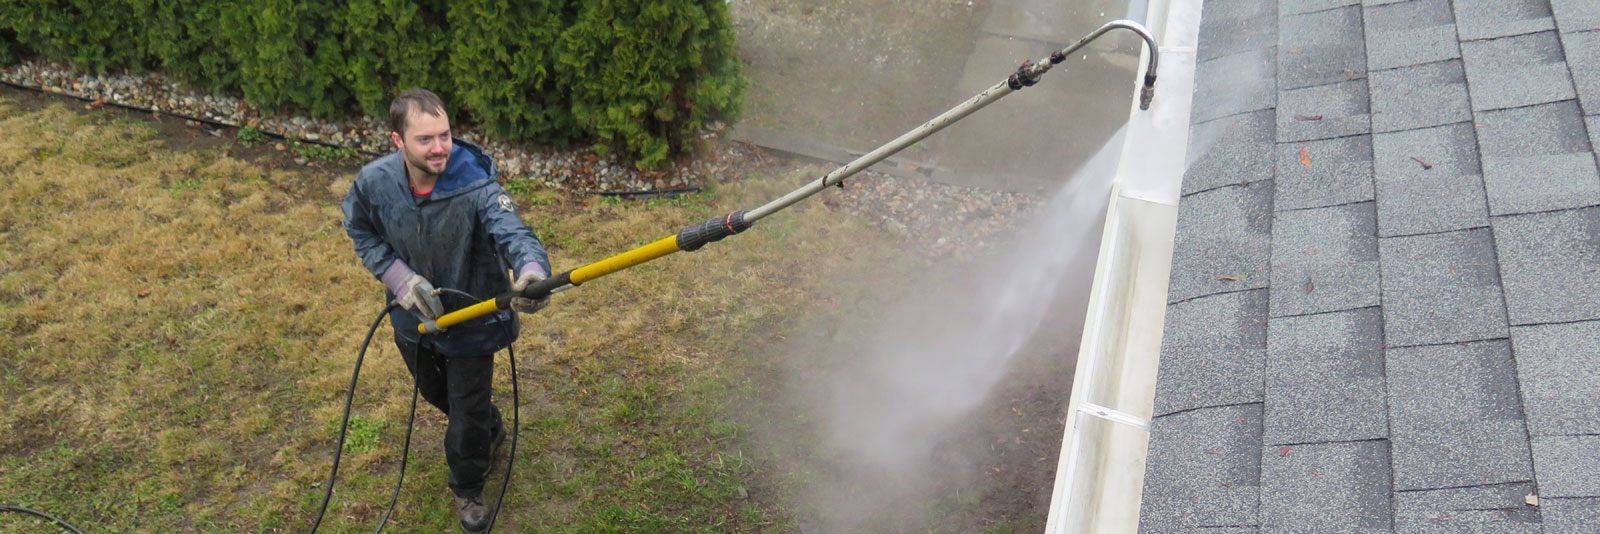 high pressure power washing of gutters